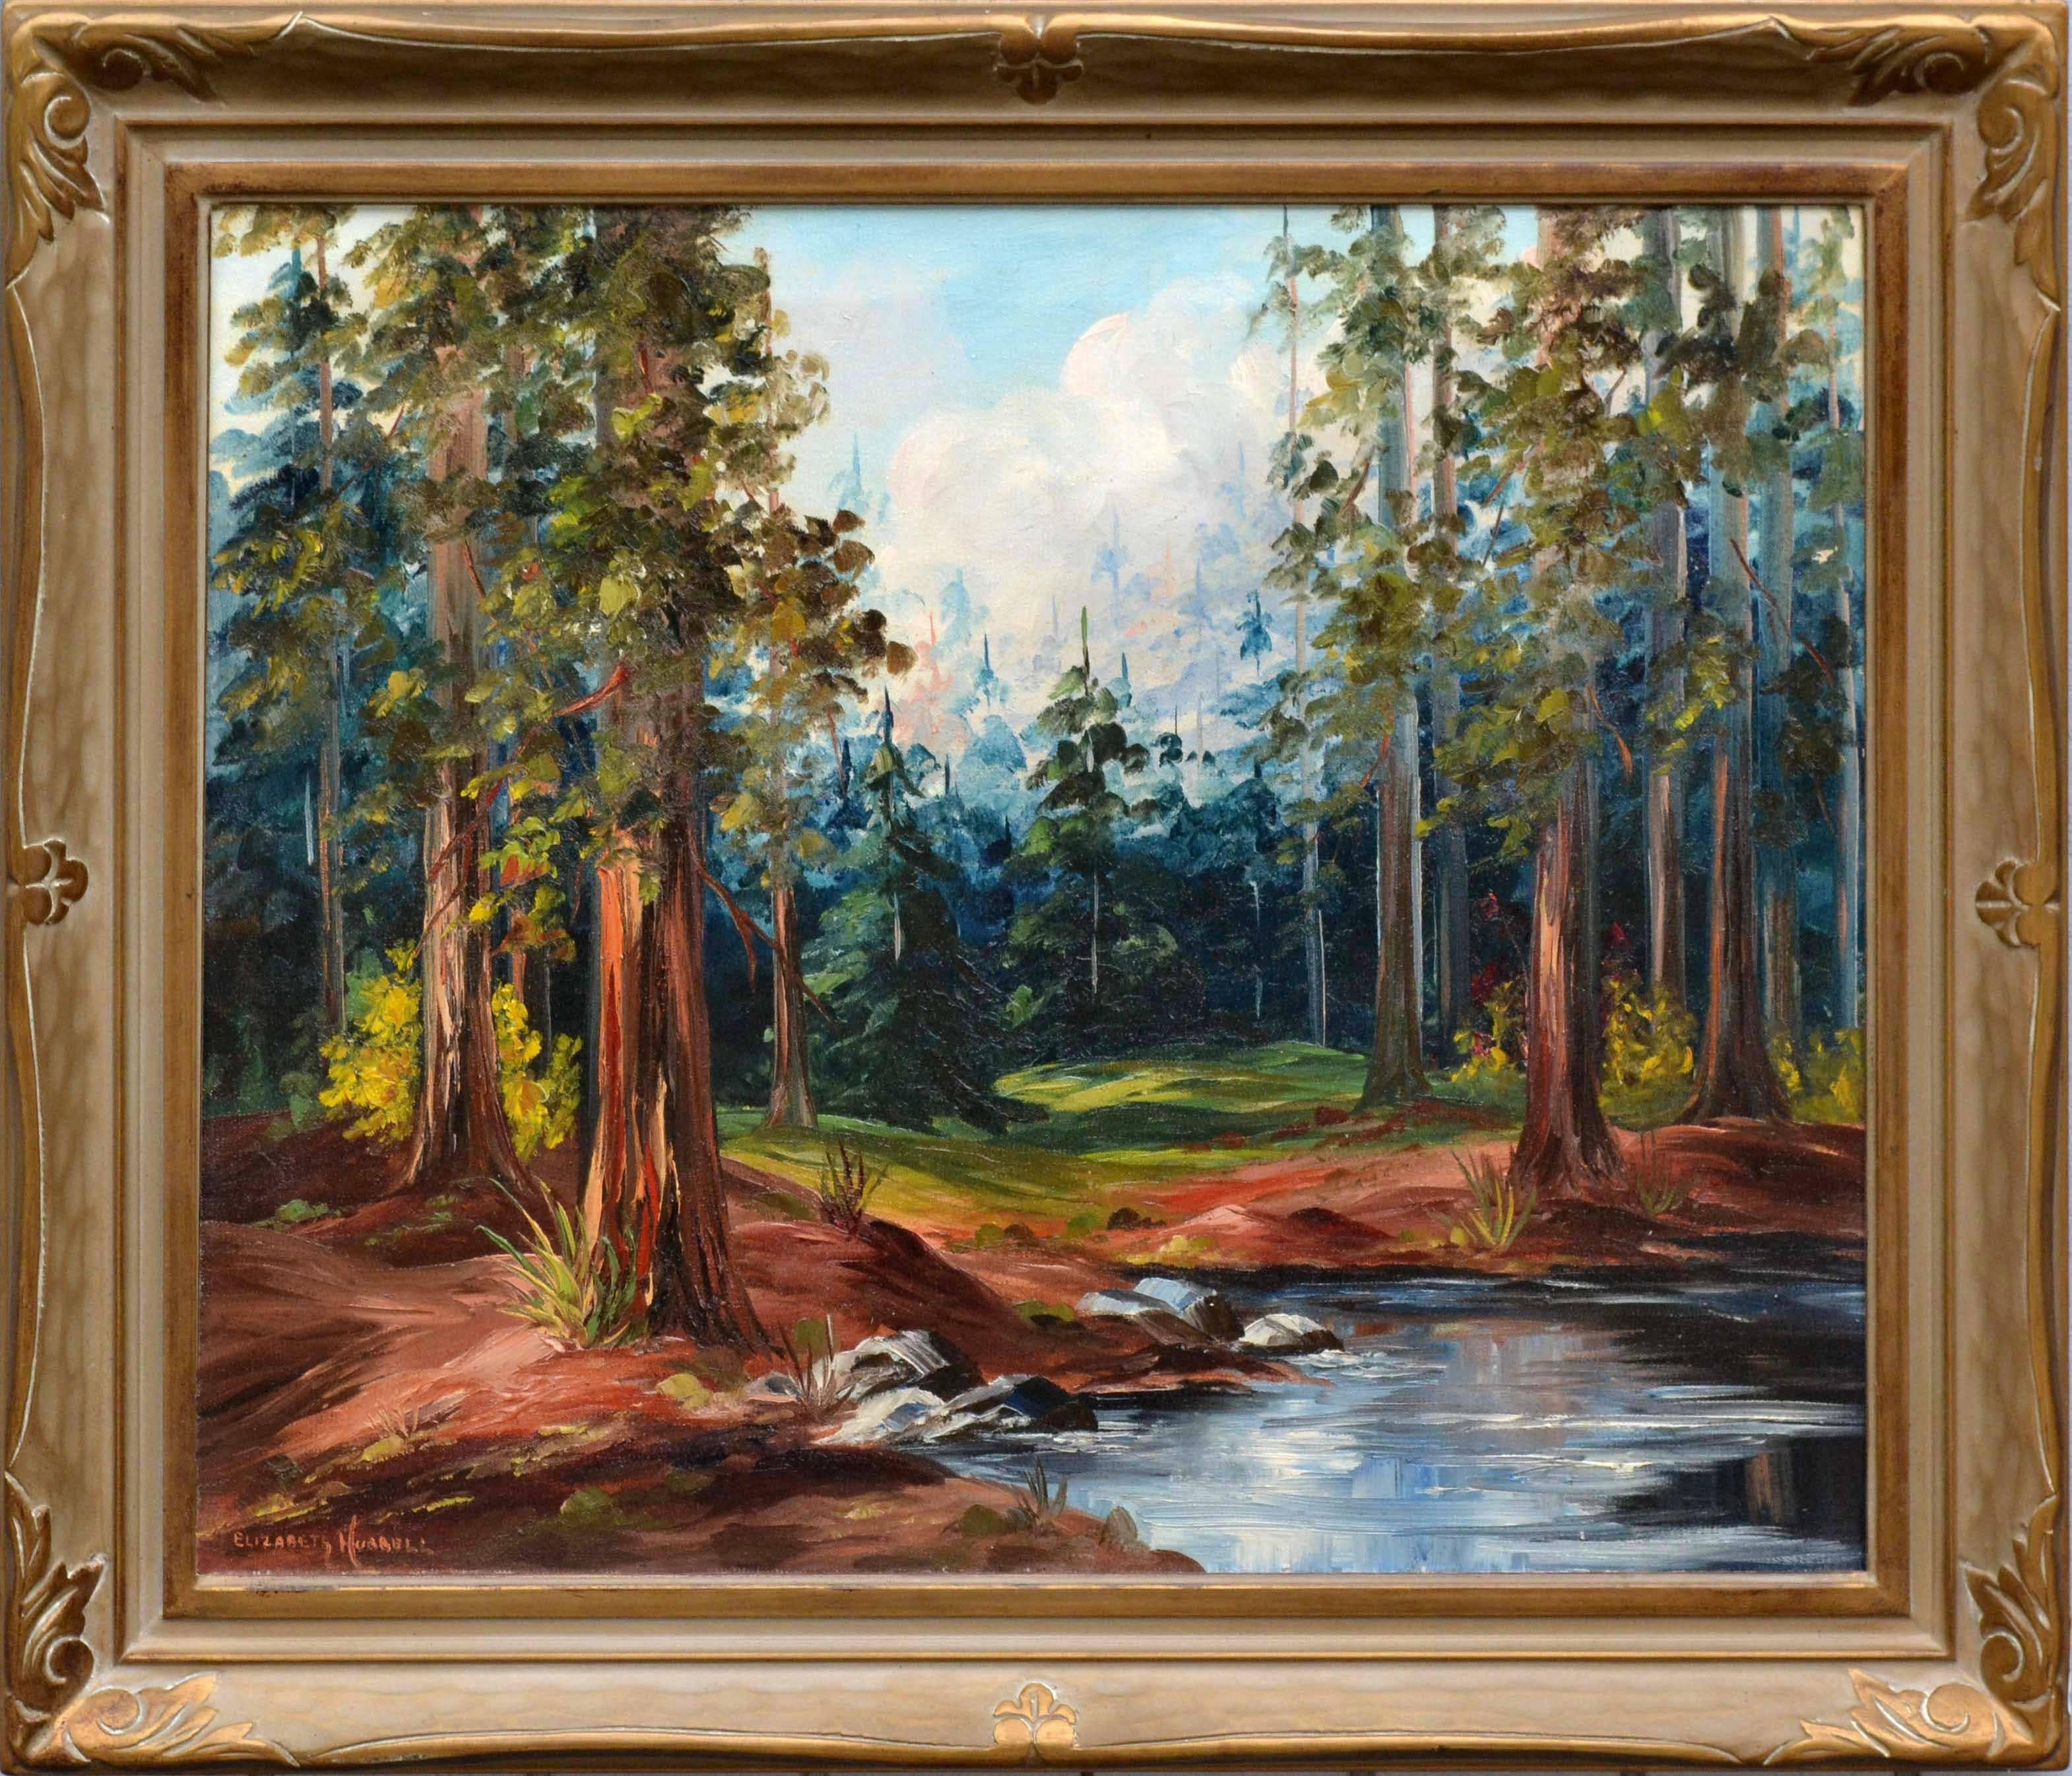 Elizabeth Hubbell Landscape Painting - Mid Century California Stream and Redwoods Forest Landscape